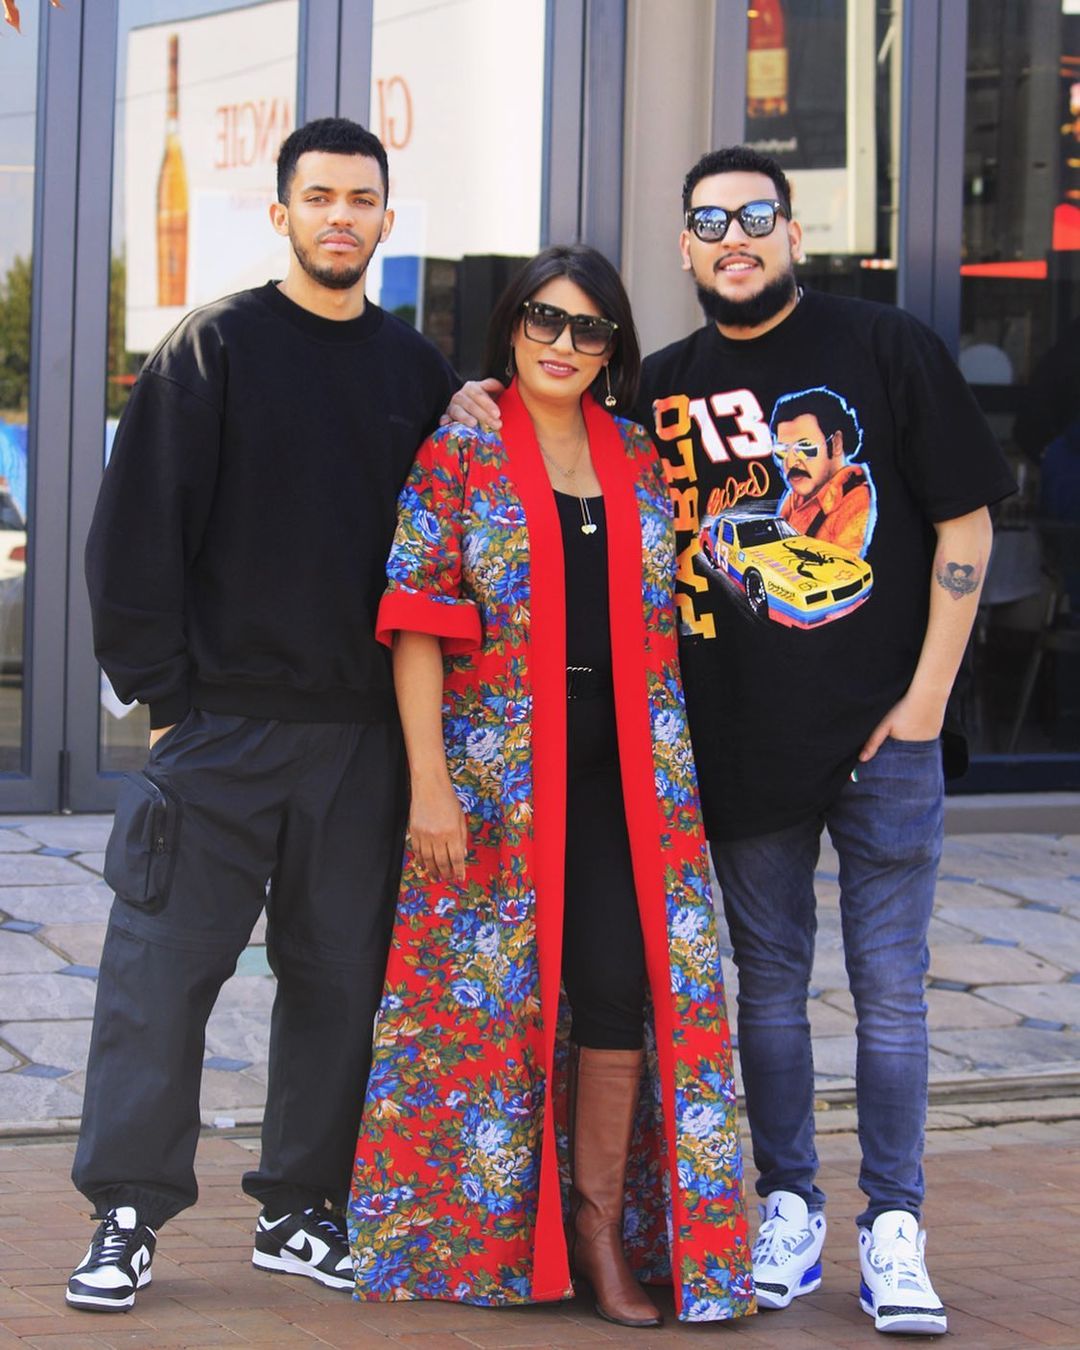 AKA with his mom and brother